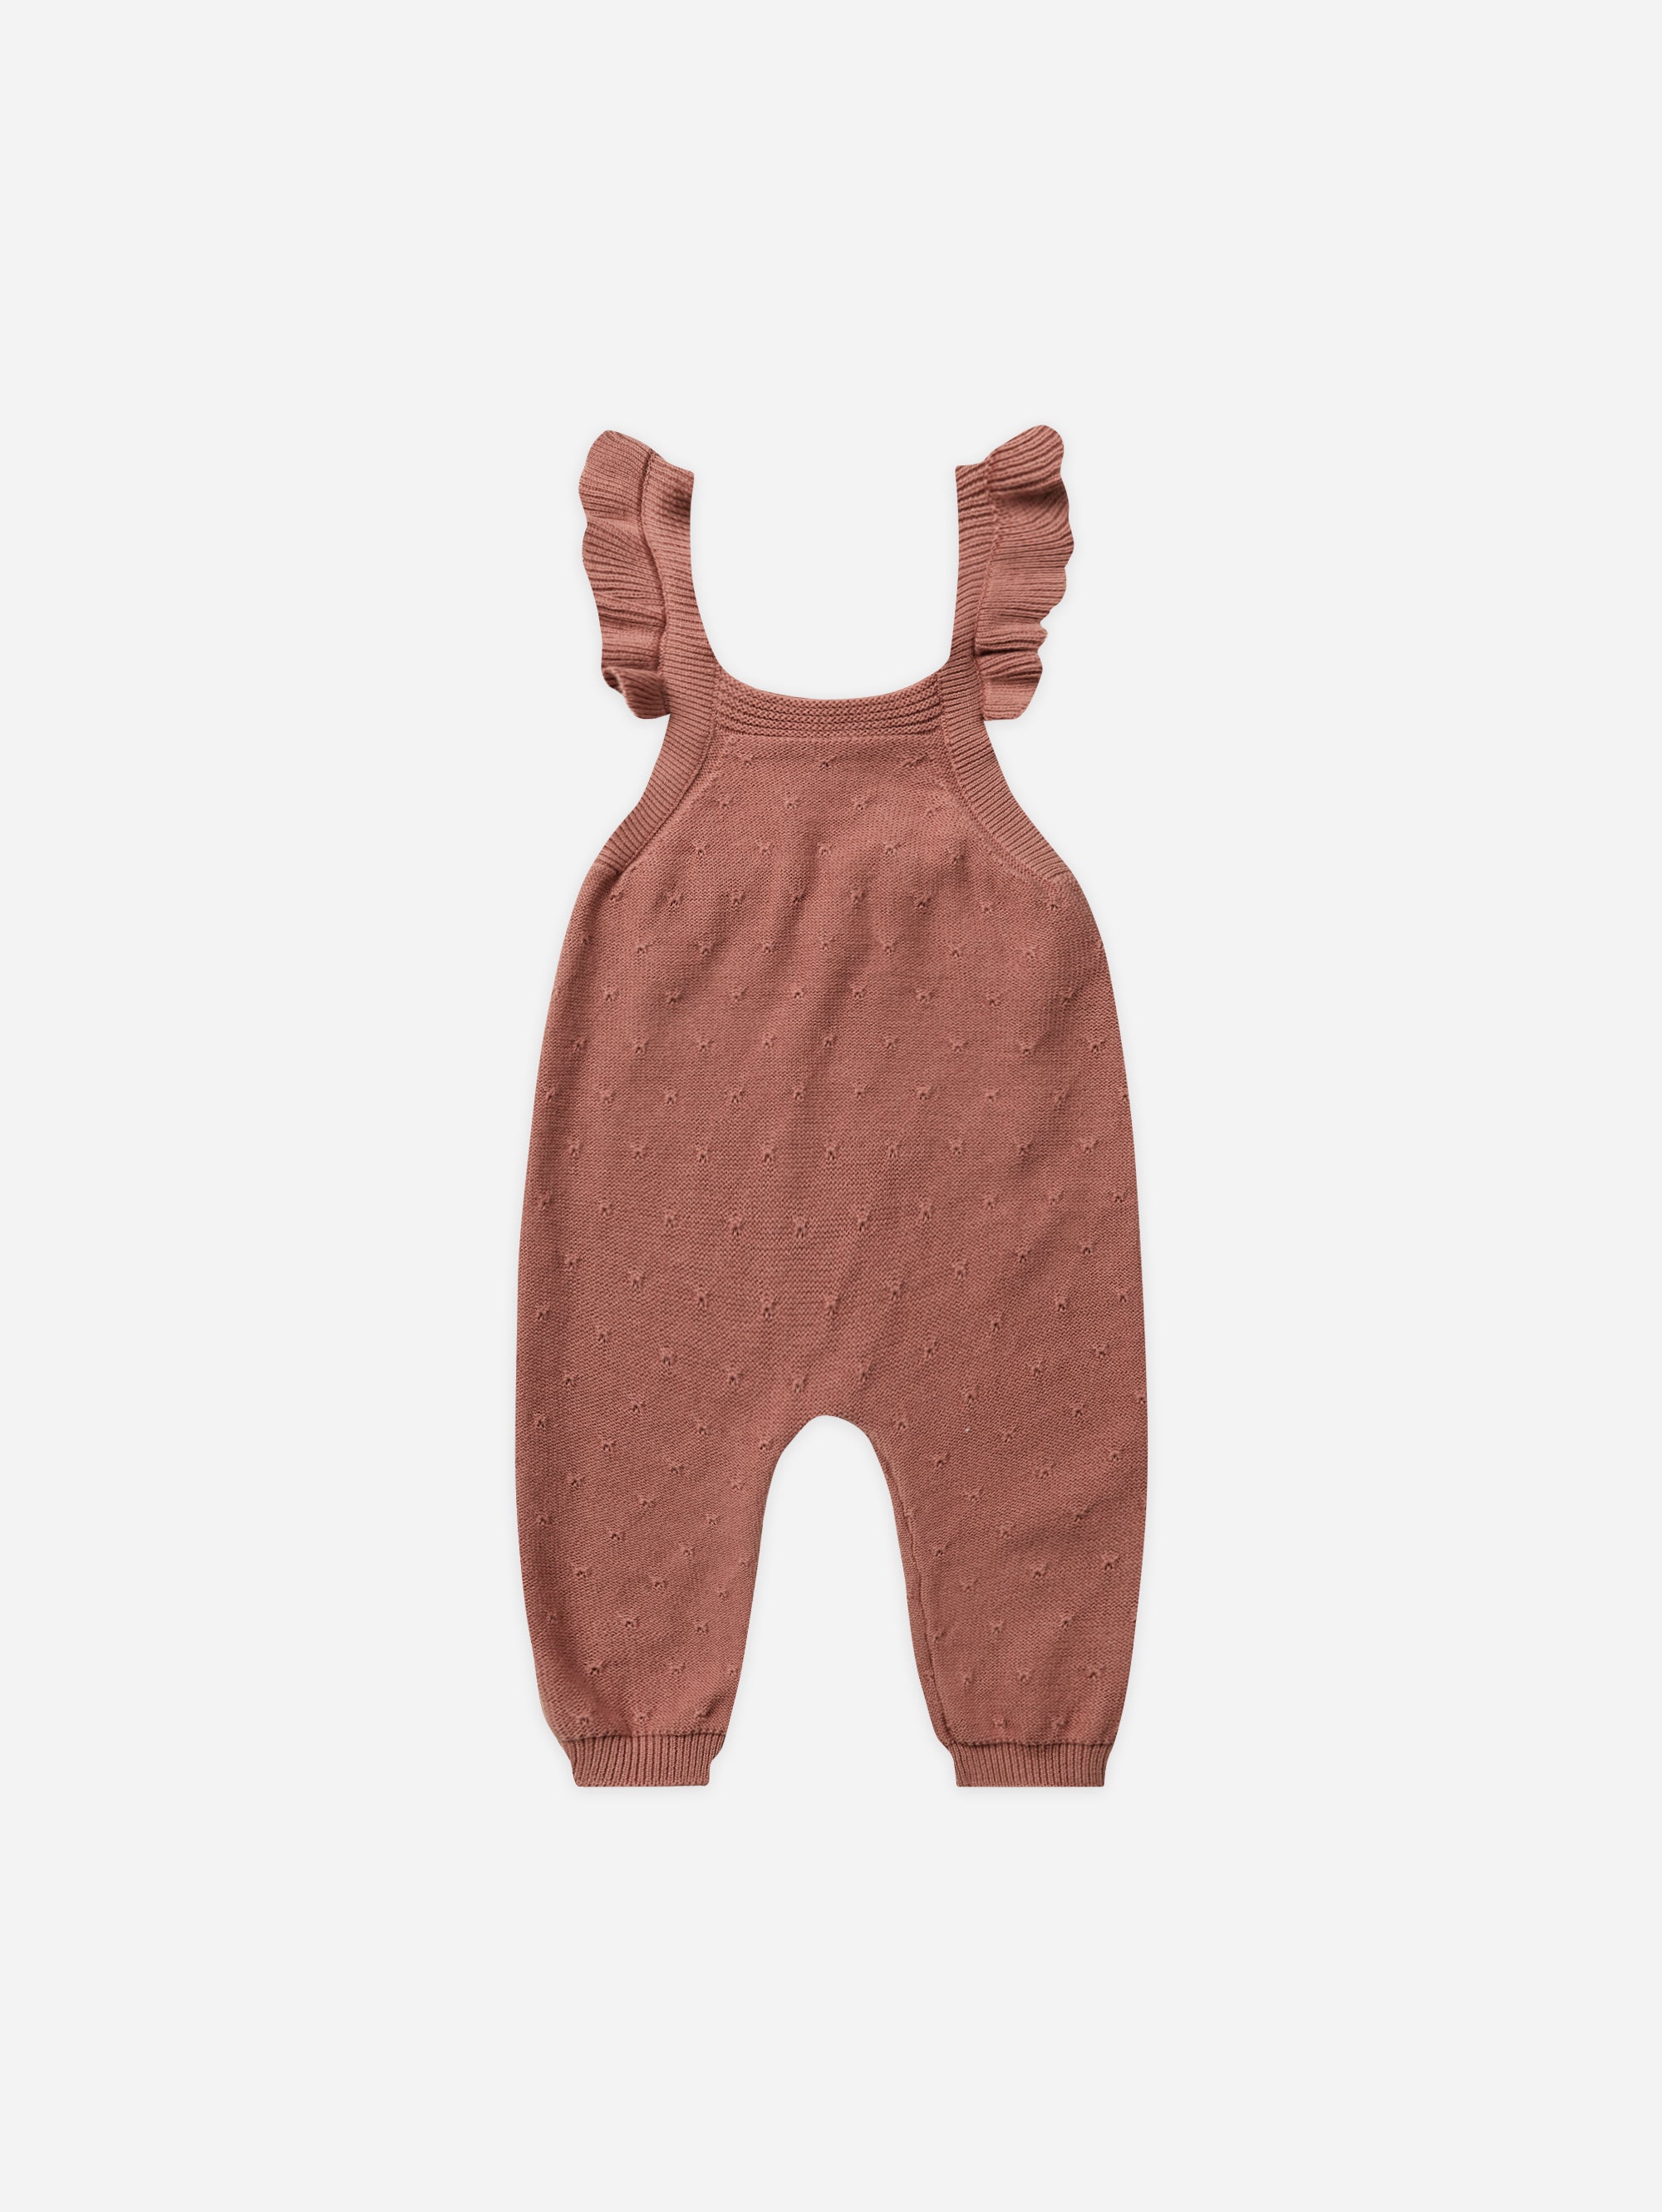 Pointelle Knit Overalls || Berry - Rylee + Cru | Kids Clothes | Trendy Baby Clothes | Modern Infant Outfits |